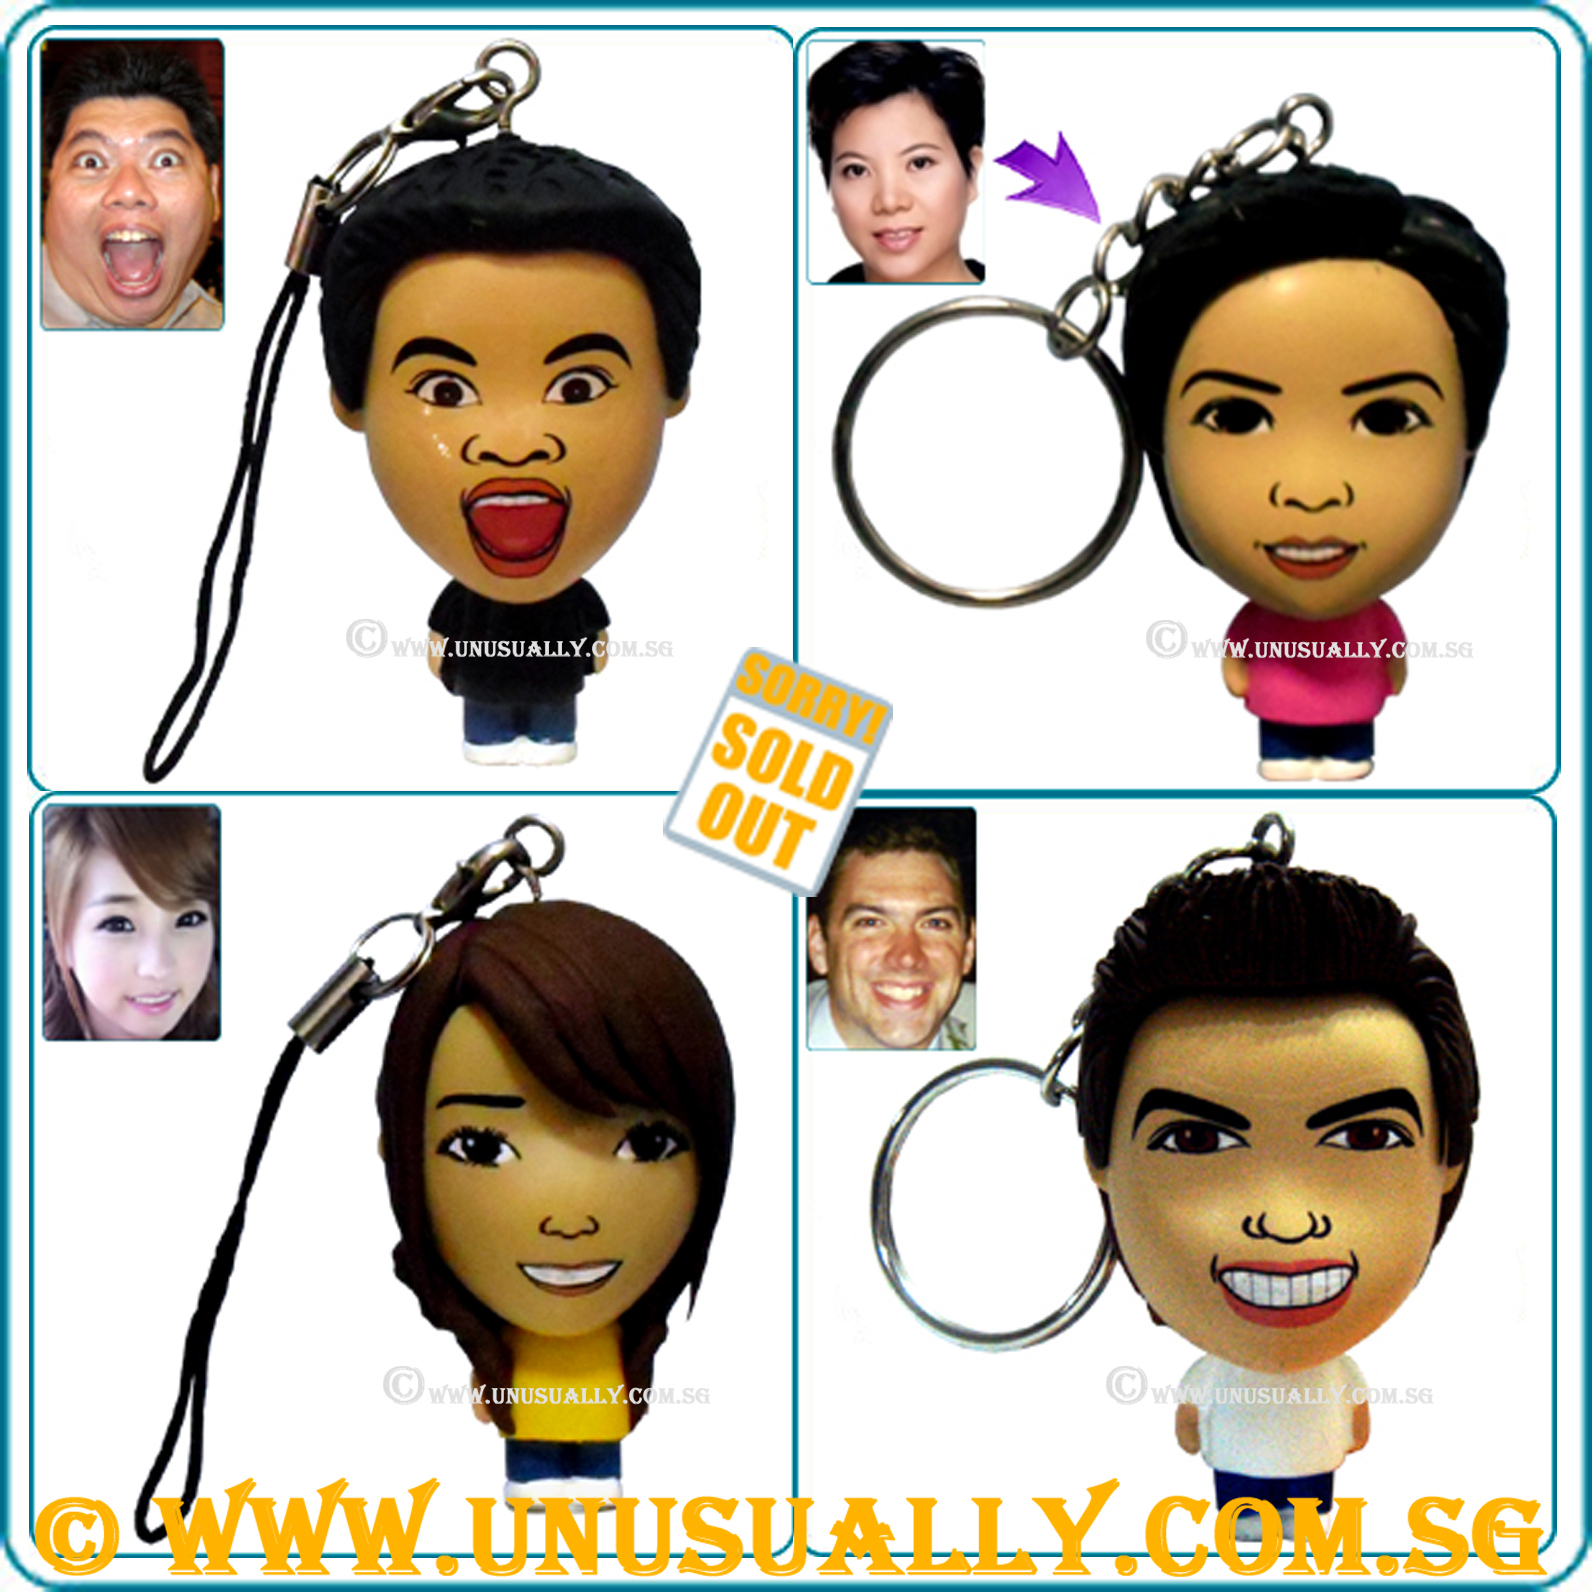 Personalized Cartoon Feel Mini Dollies - SOLD OUT